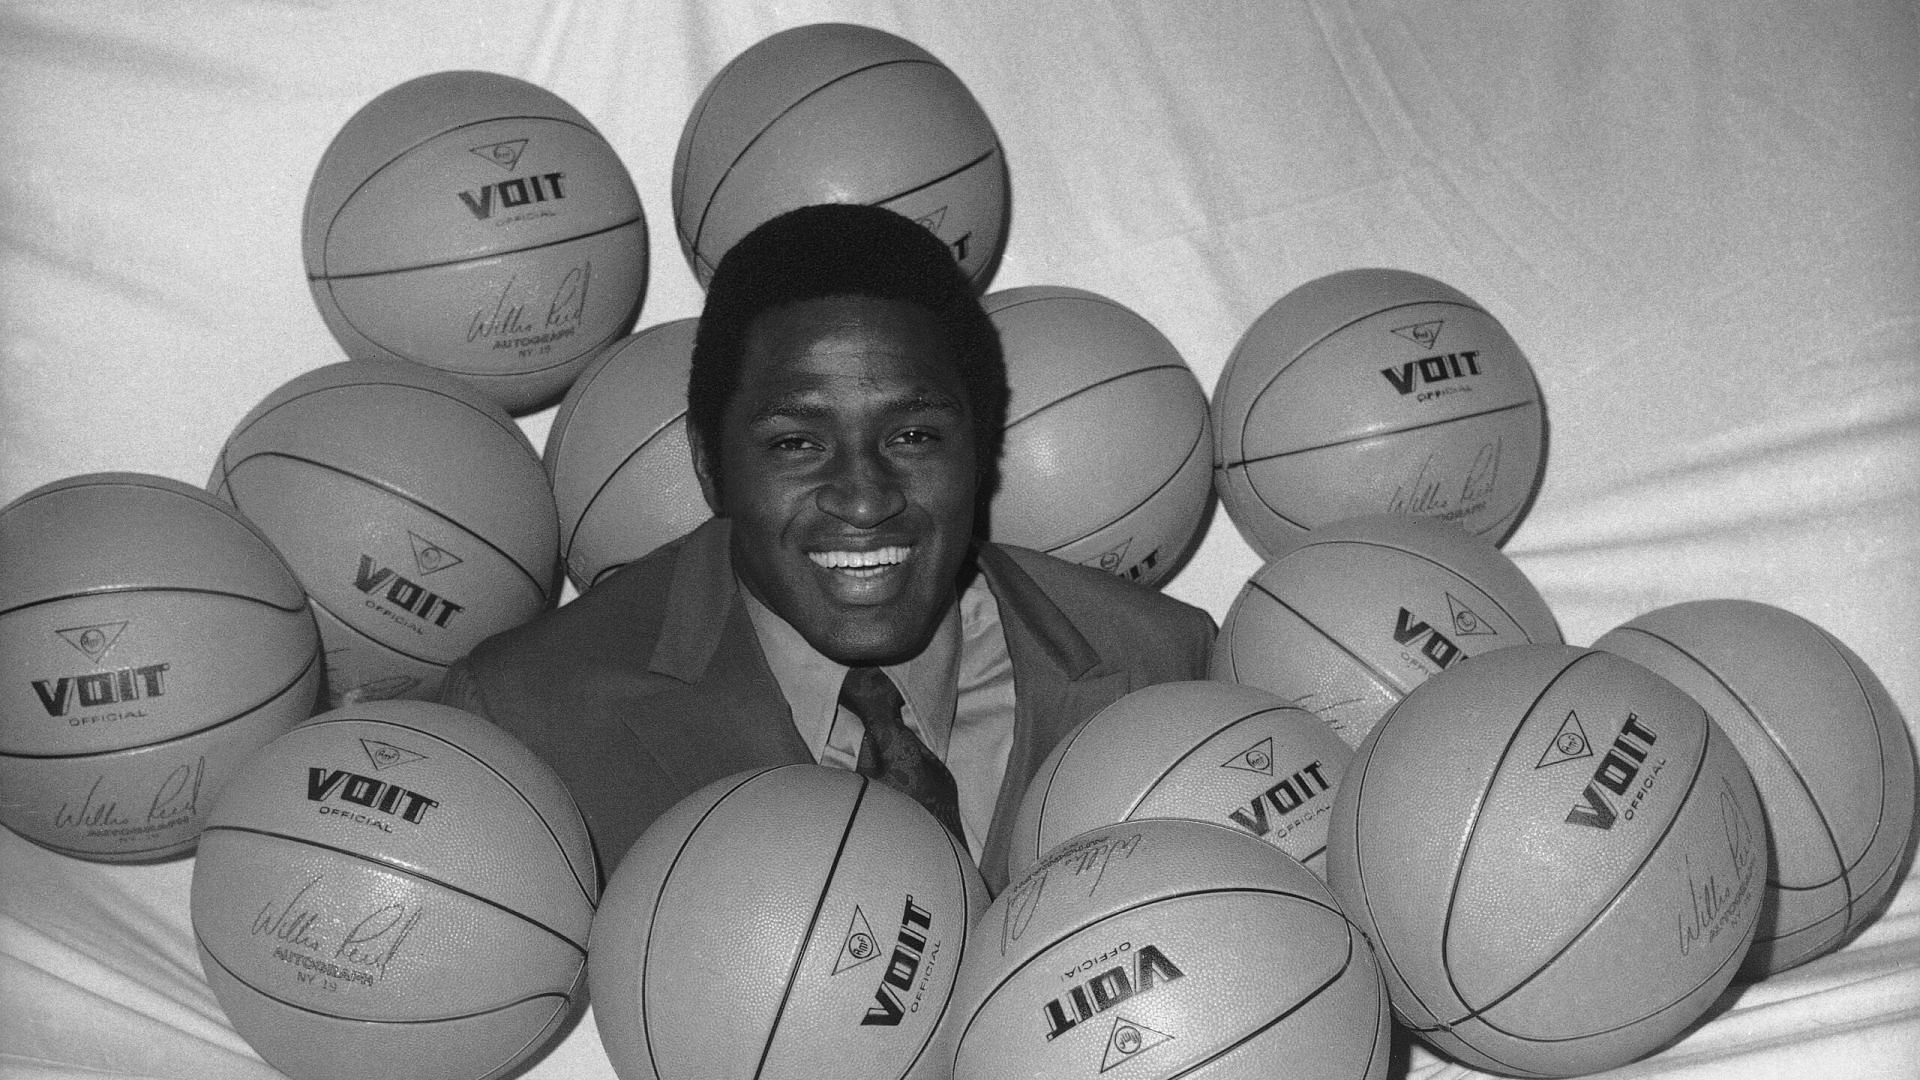 New York Knicks legend Willis Reed has passed away at the age of 80